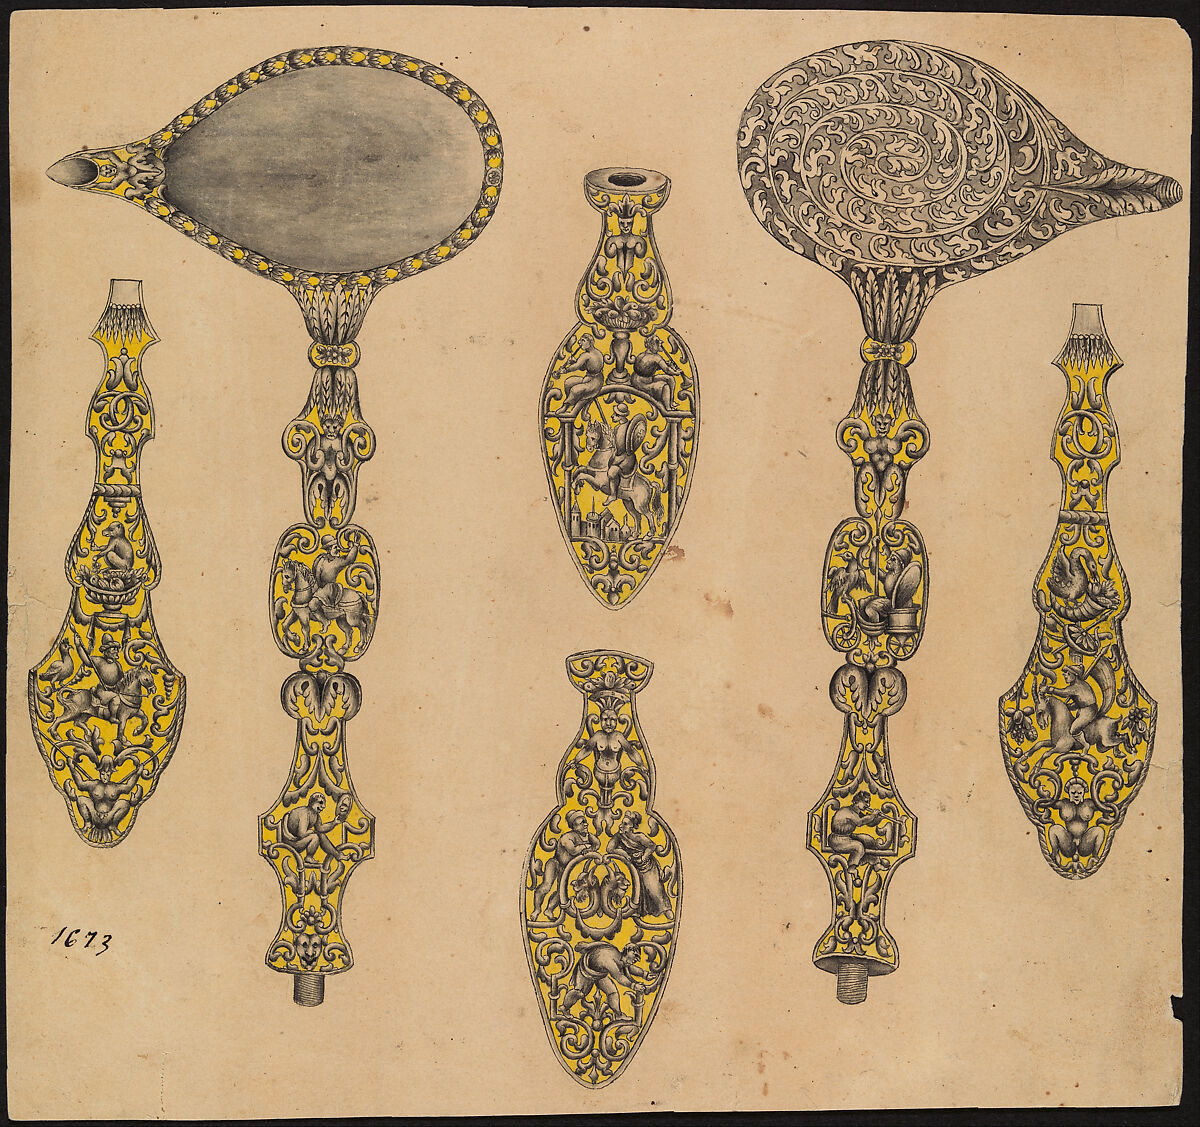 Design for the Decoration of Two Firearms Accessories, a Ladle and a Screwdriver, Eusebio Zuloaga (Spanish, Madrid and Eibar 1808–1898), Pen, ink, and colored wash on paper, Spanish 